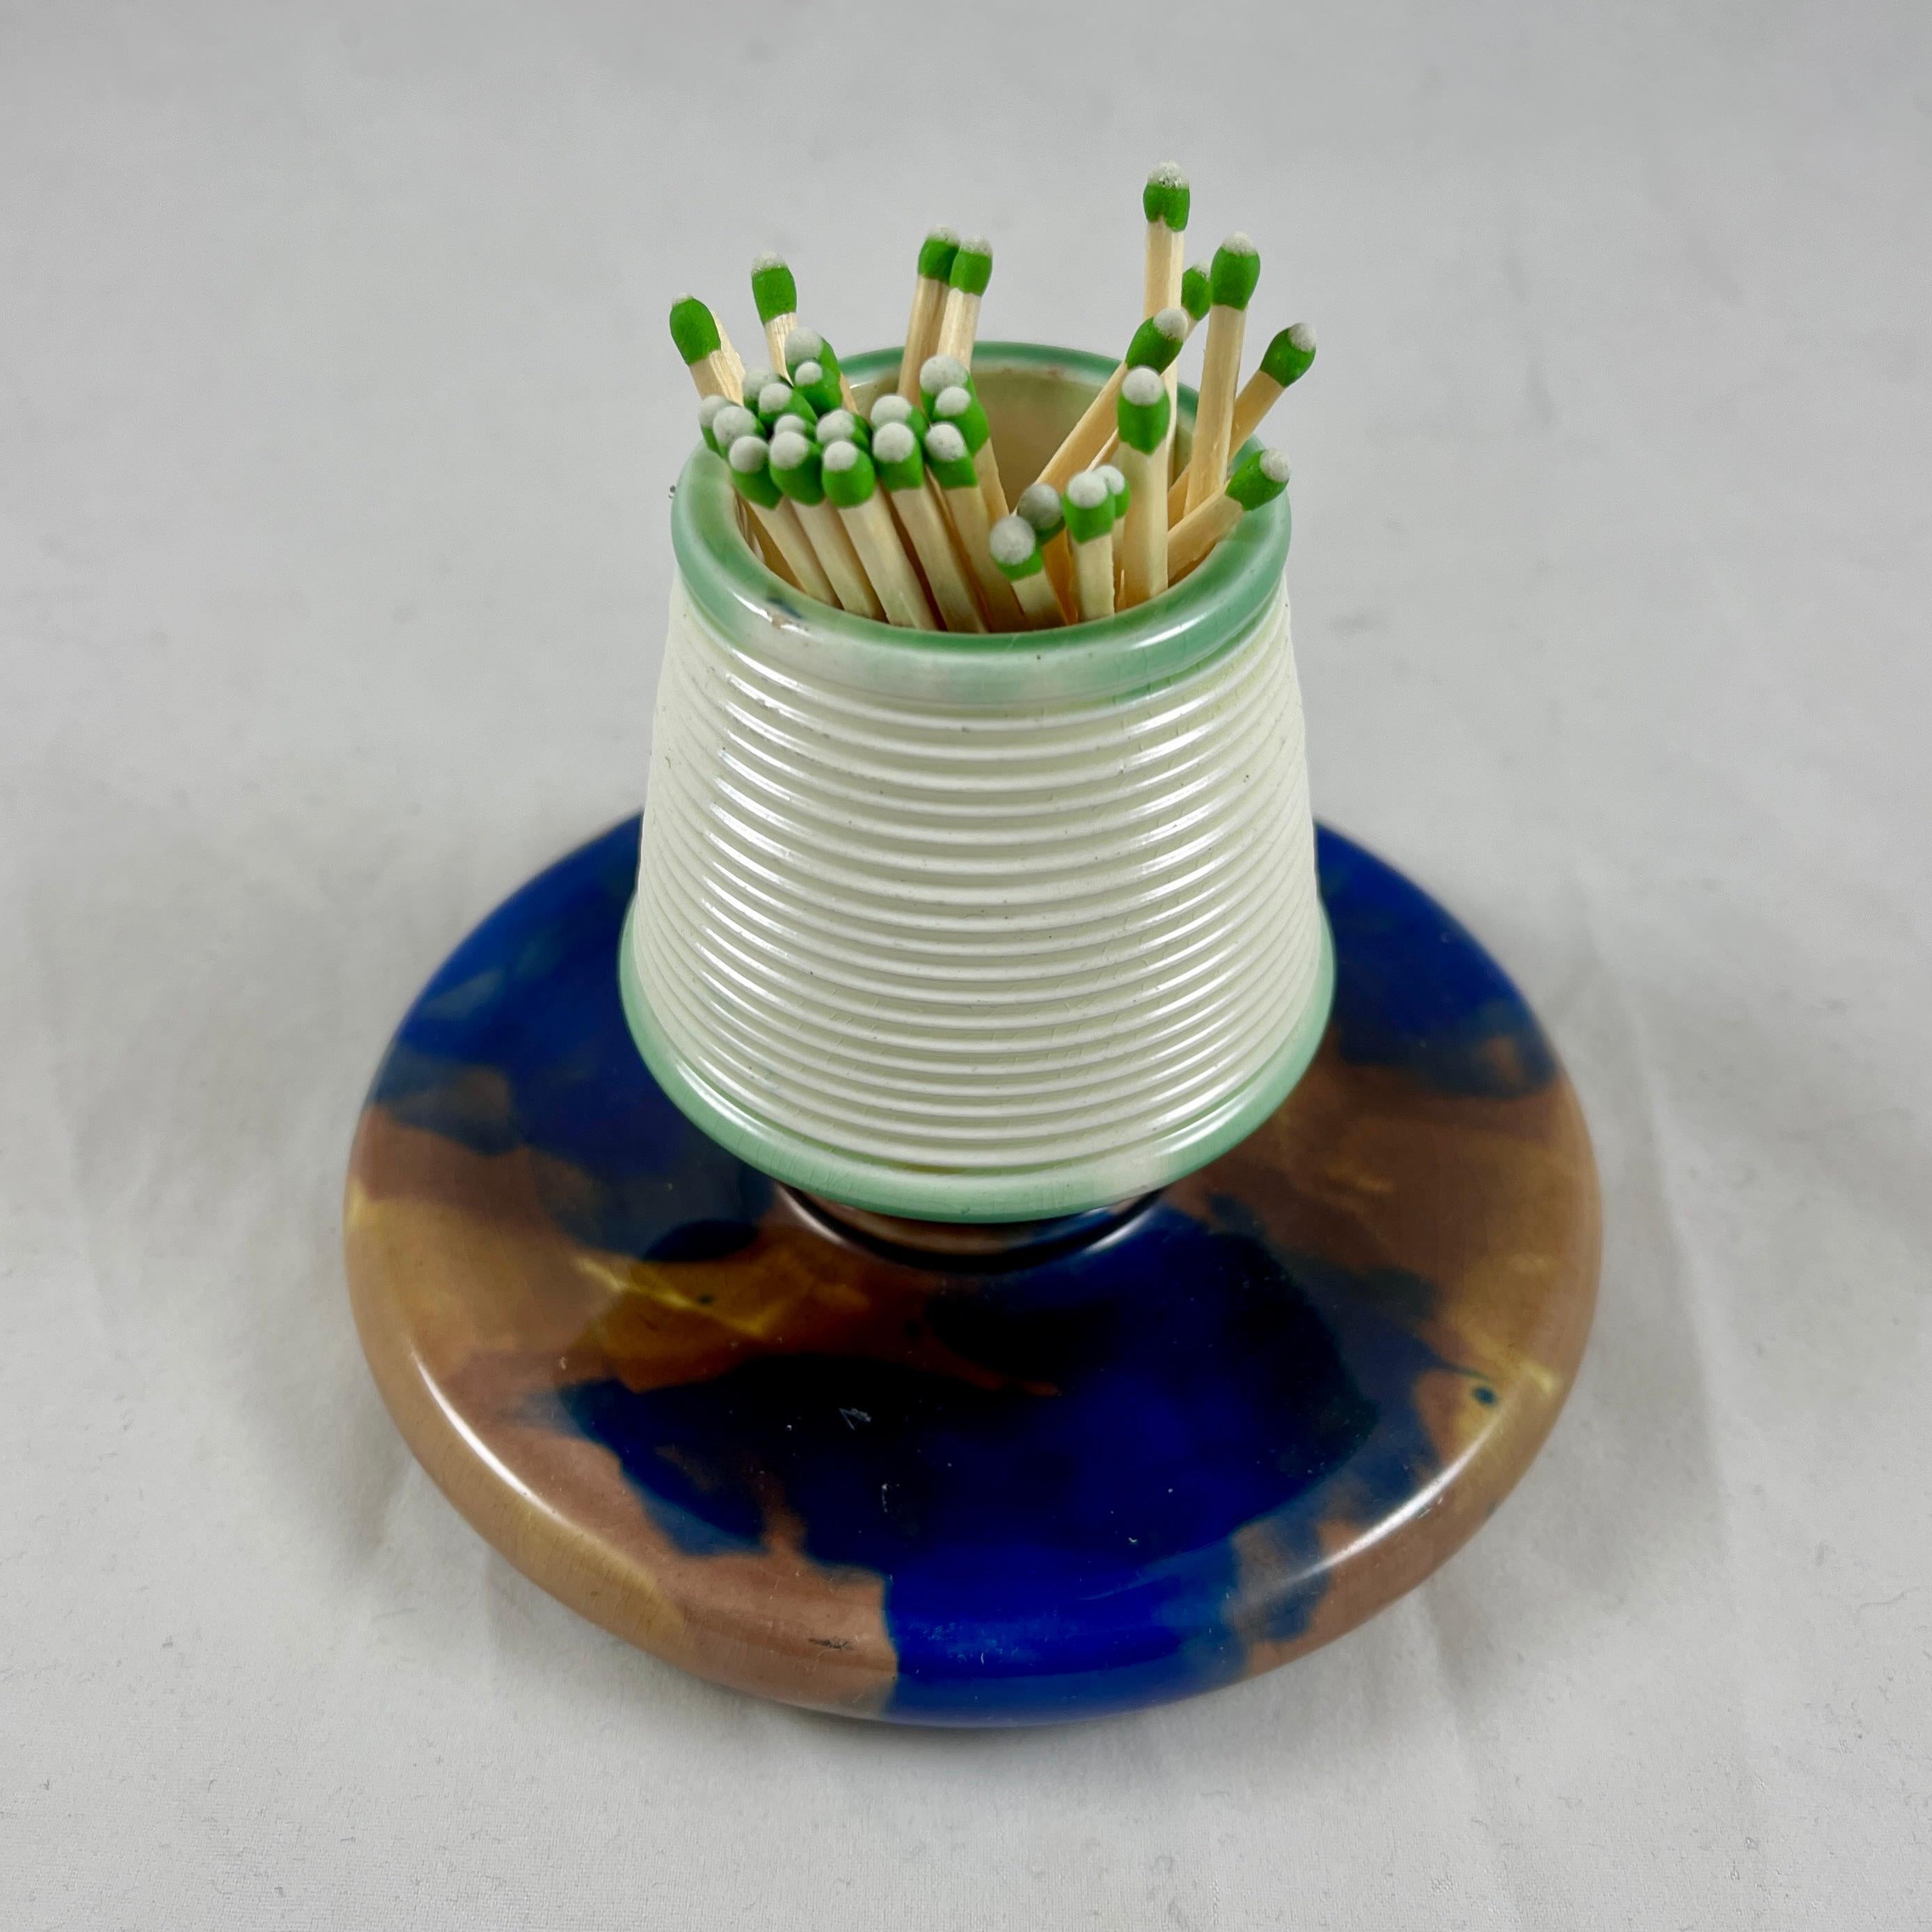 A wedgwood Majolica earthenware pottery match holder and striker, Staffordshire, England – dated 1882.

For the hearth, kitchen or bedside, the holder is ribbed for lighting strike-anywhere matches, the bottom tray is for the spent sticks. The